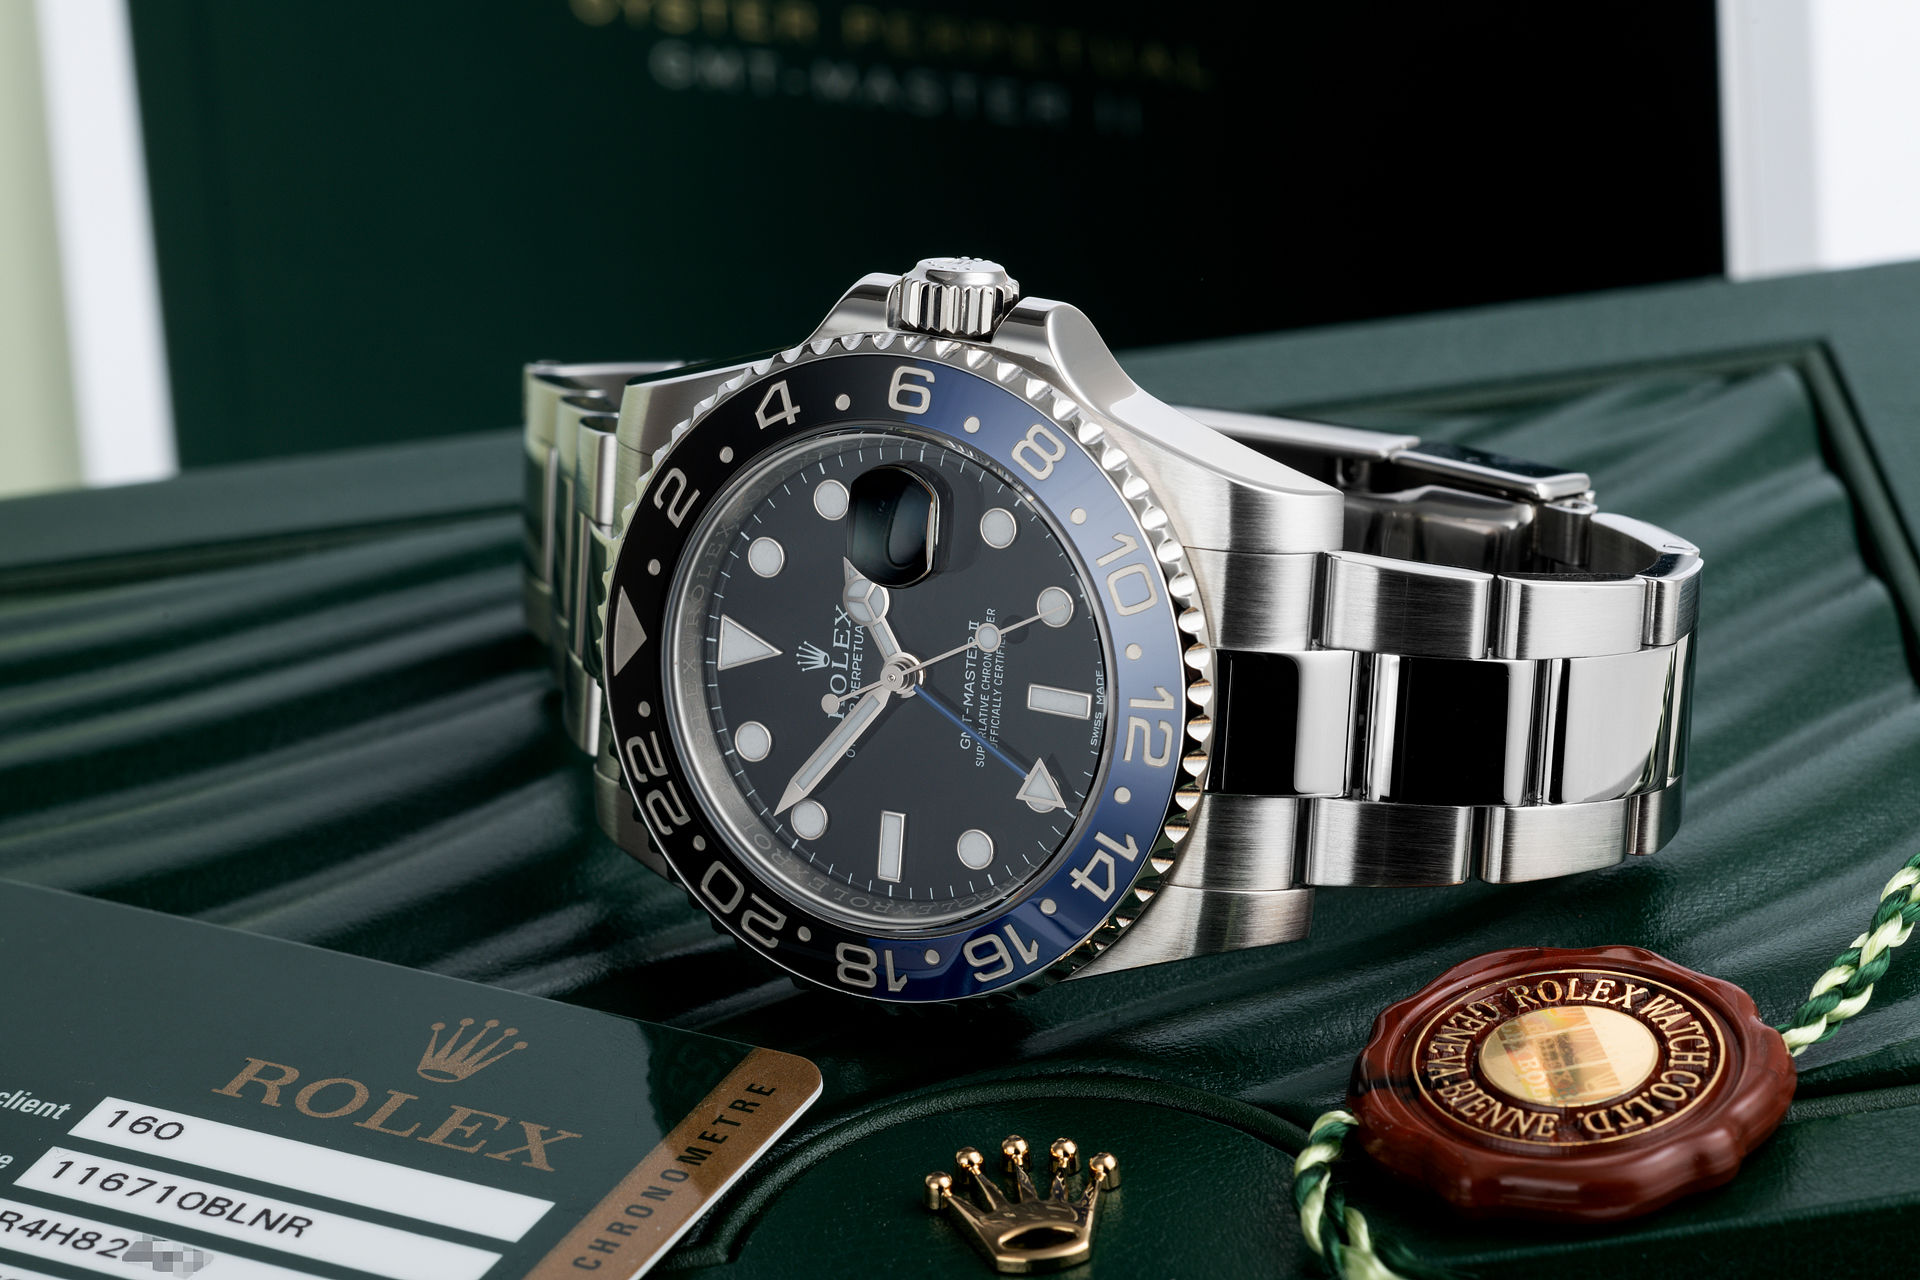 ref 116710BLNR | Box and Certificate  | Rolex GMT-Master II